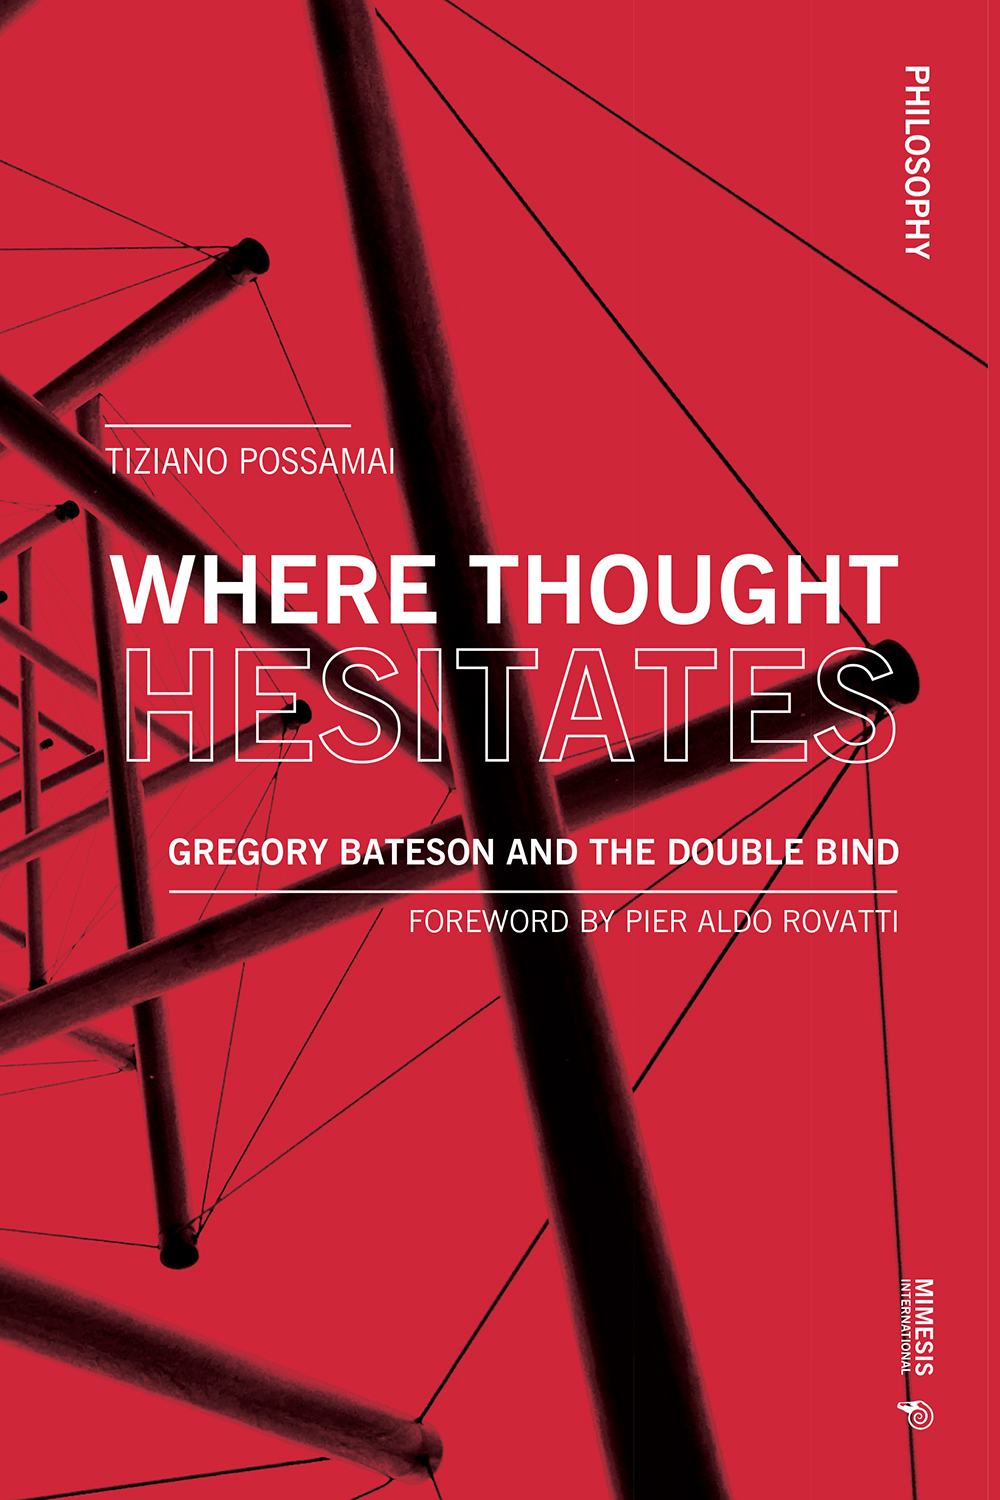 Where Thought Hesitates. Gregory Bateson and the Double Bind